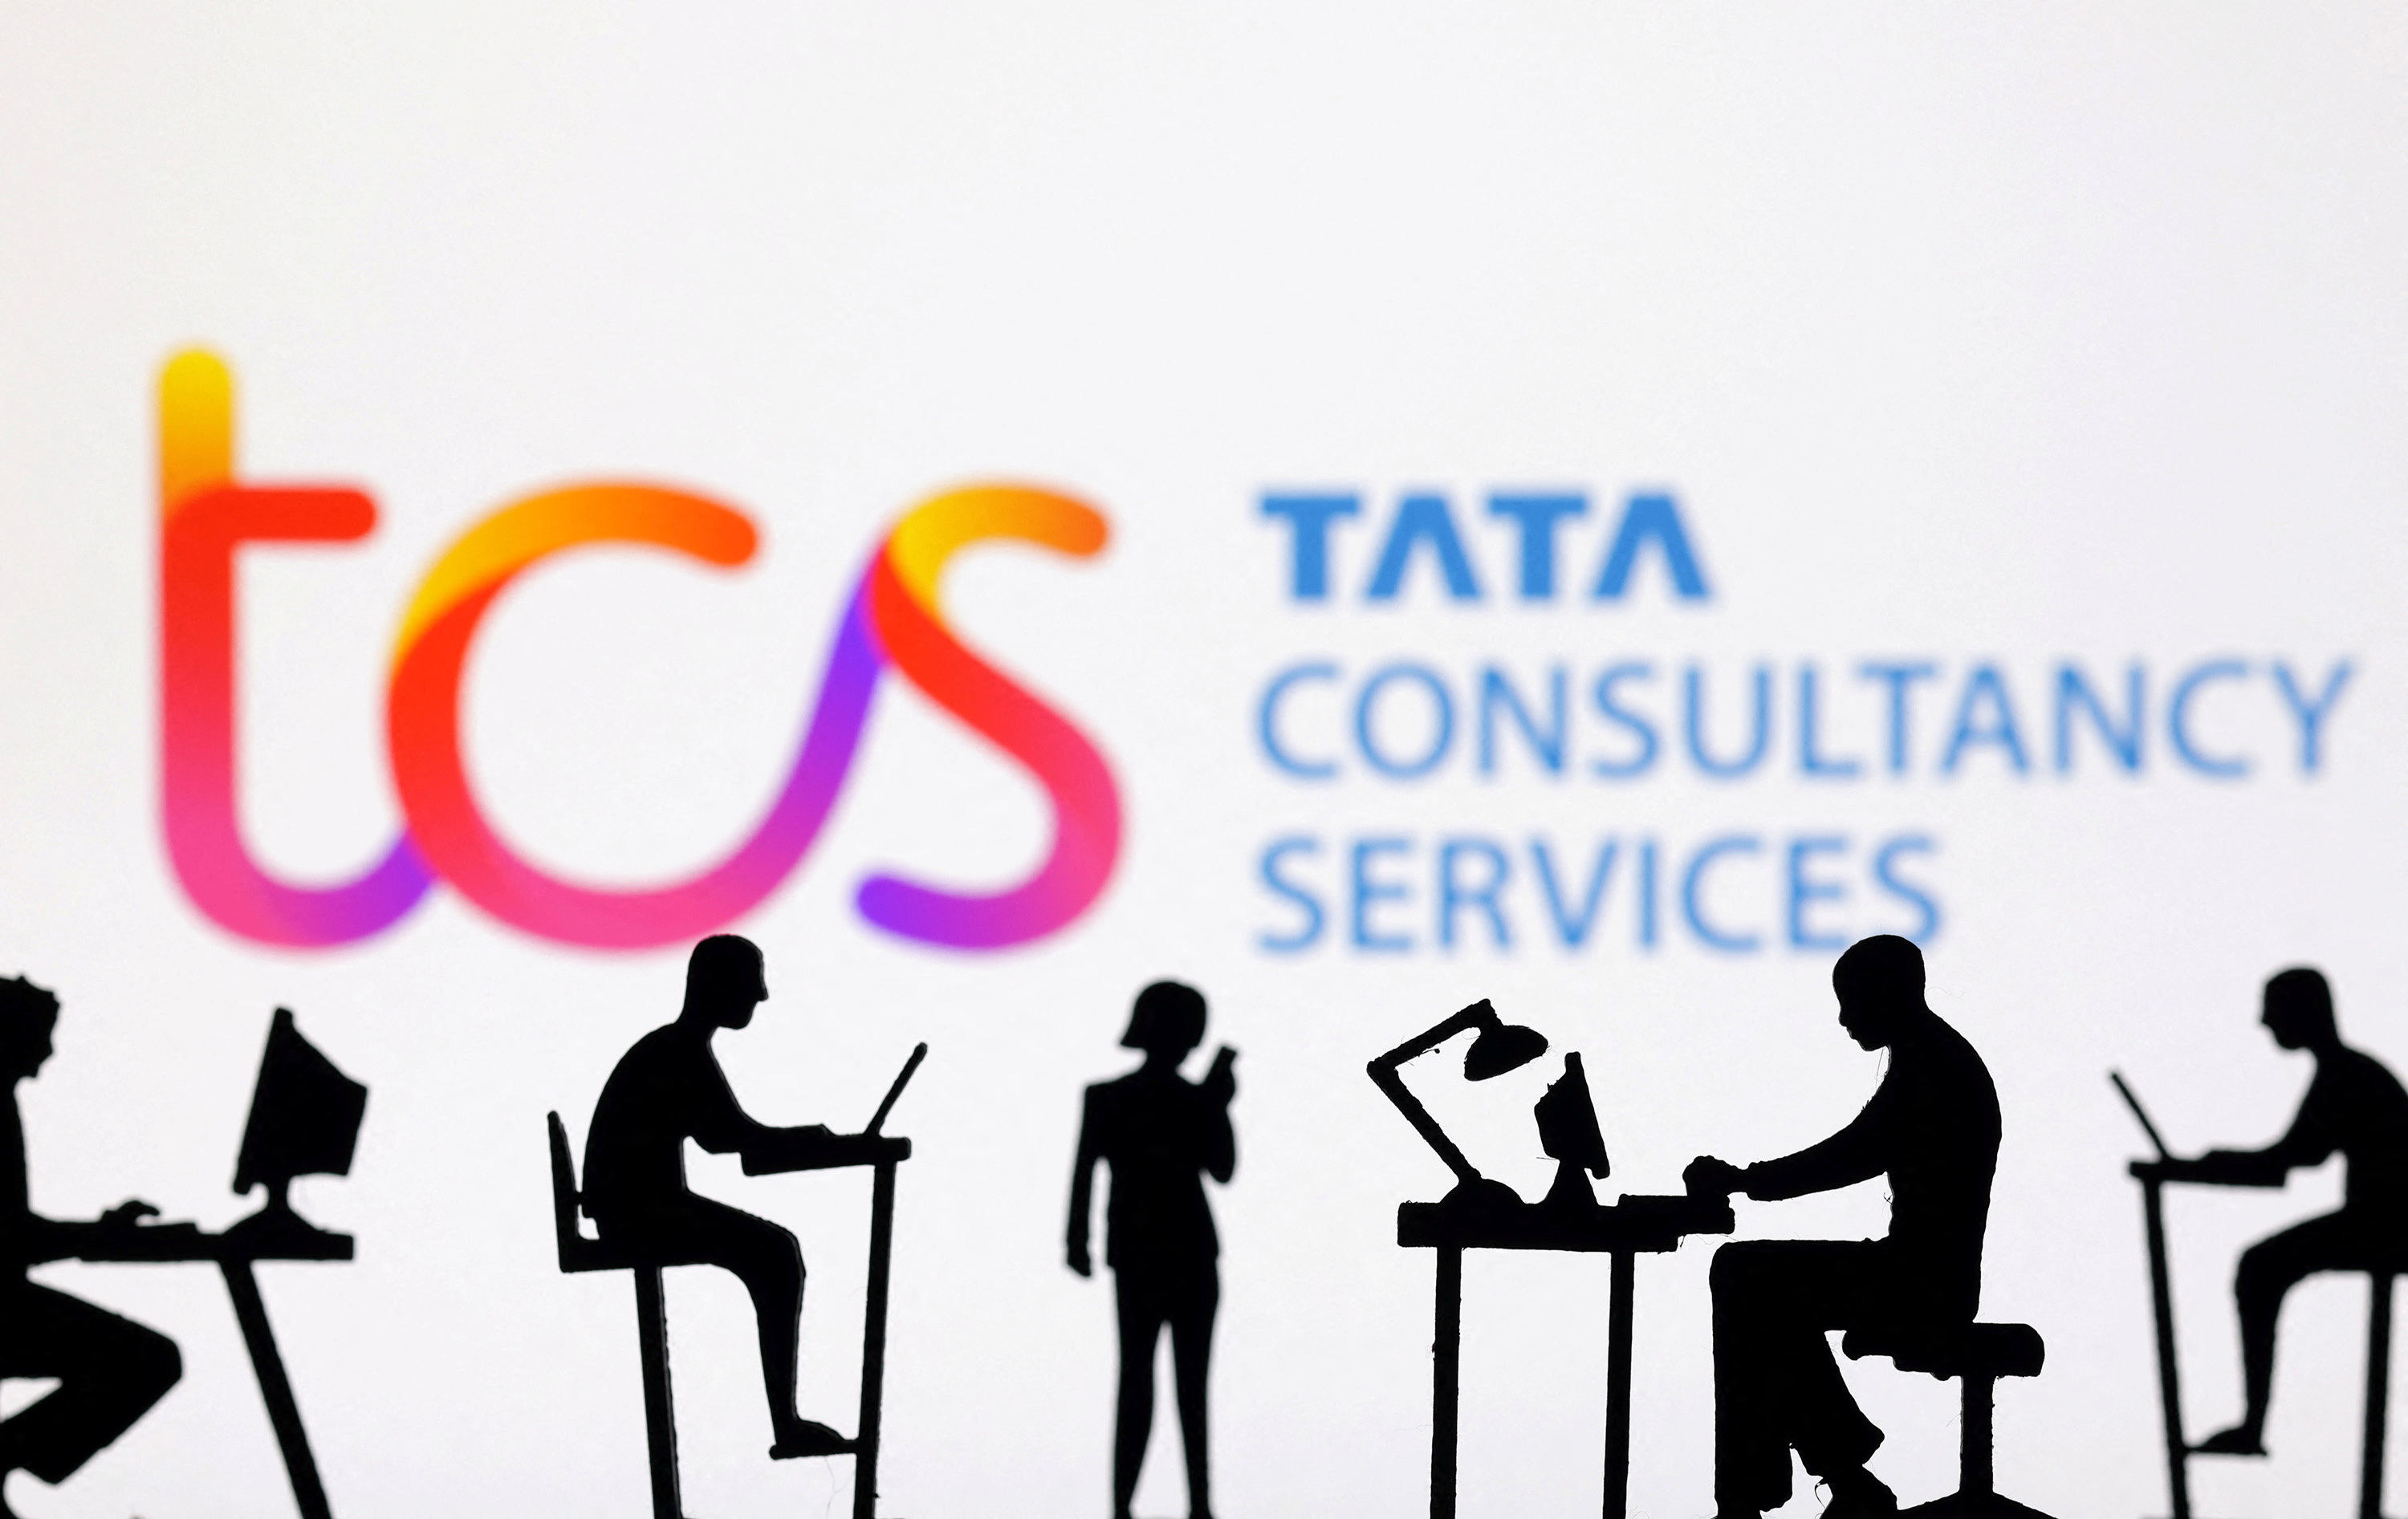 Illustration shows TCS: Tata Consultancy Services logo